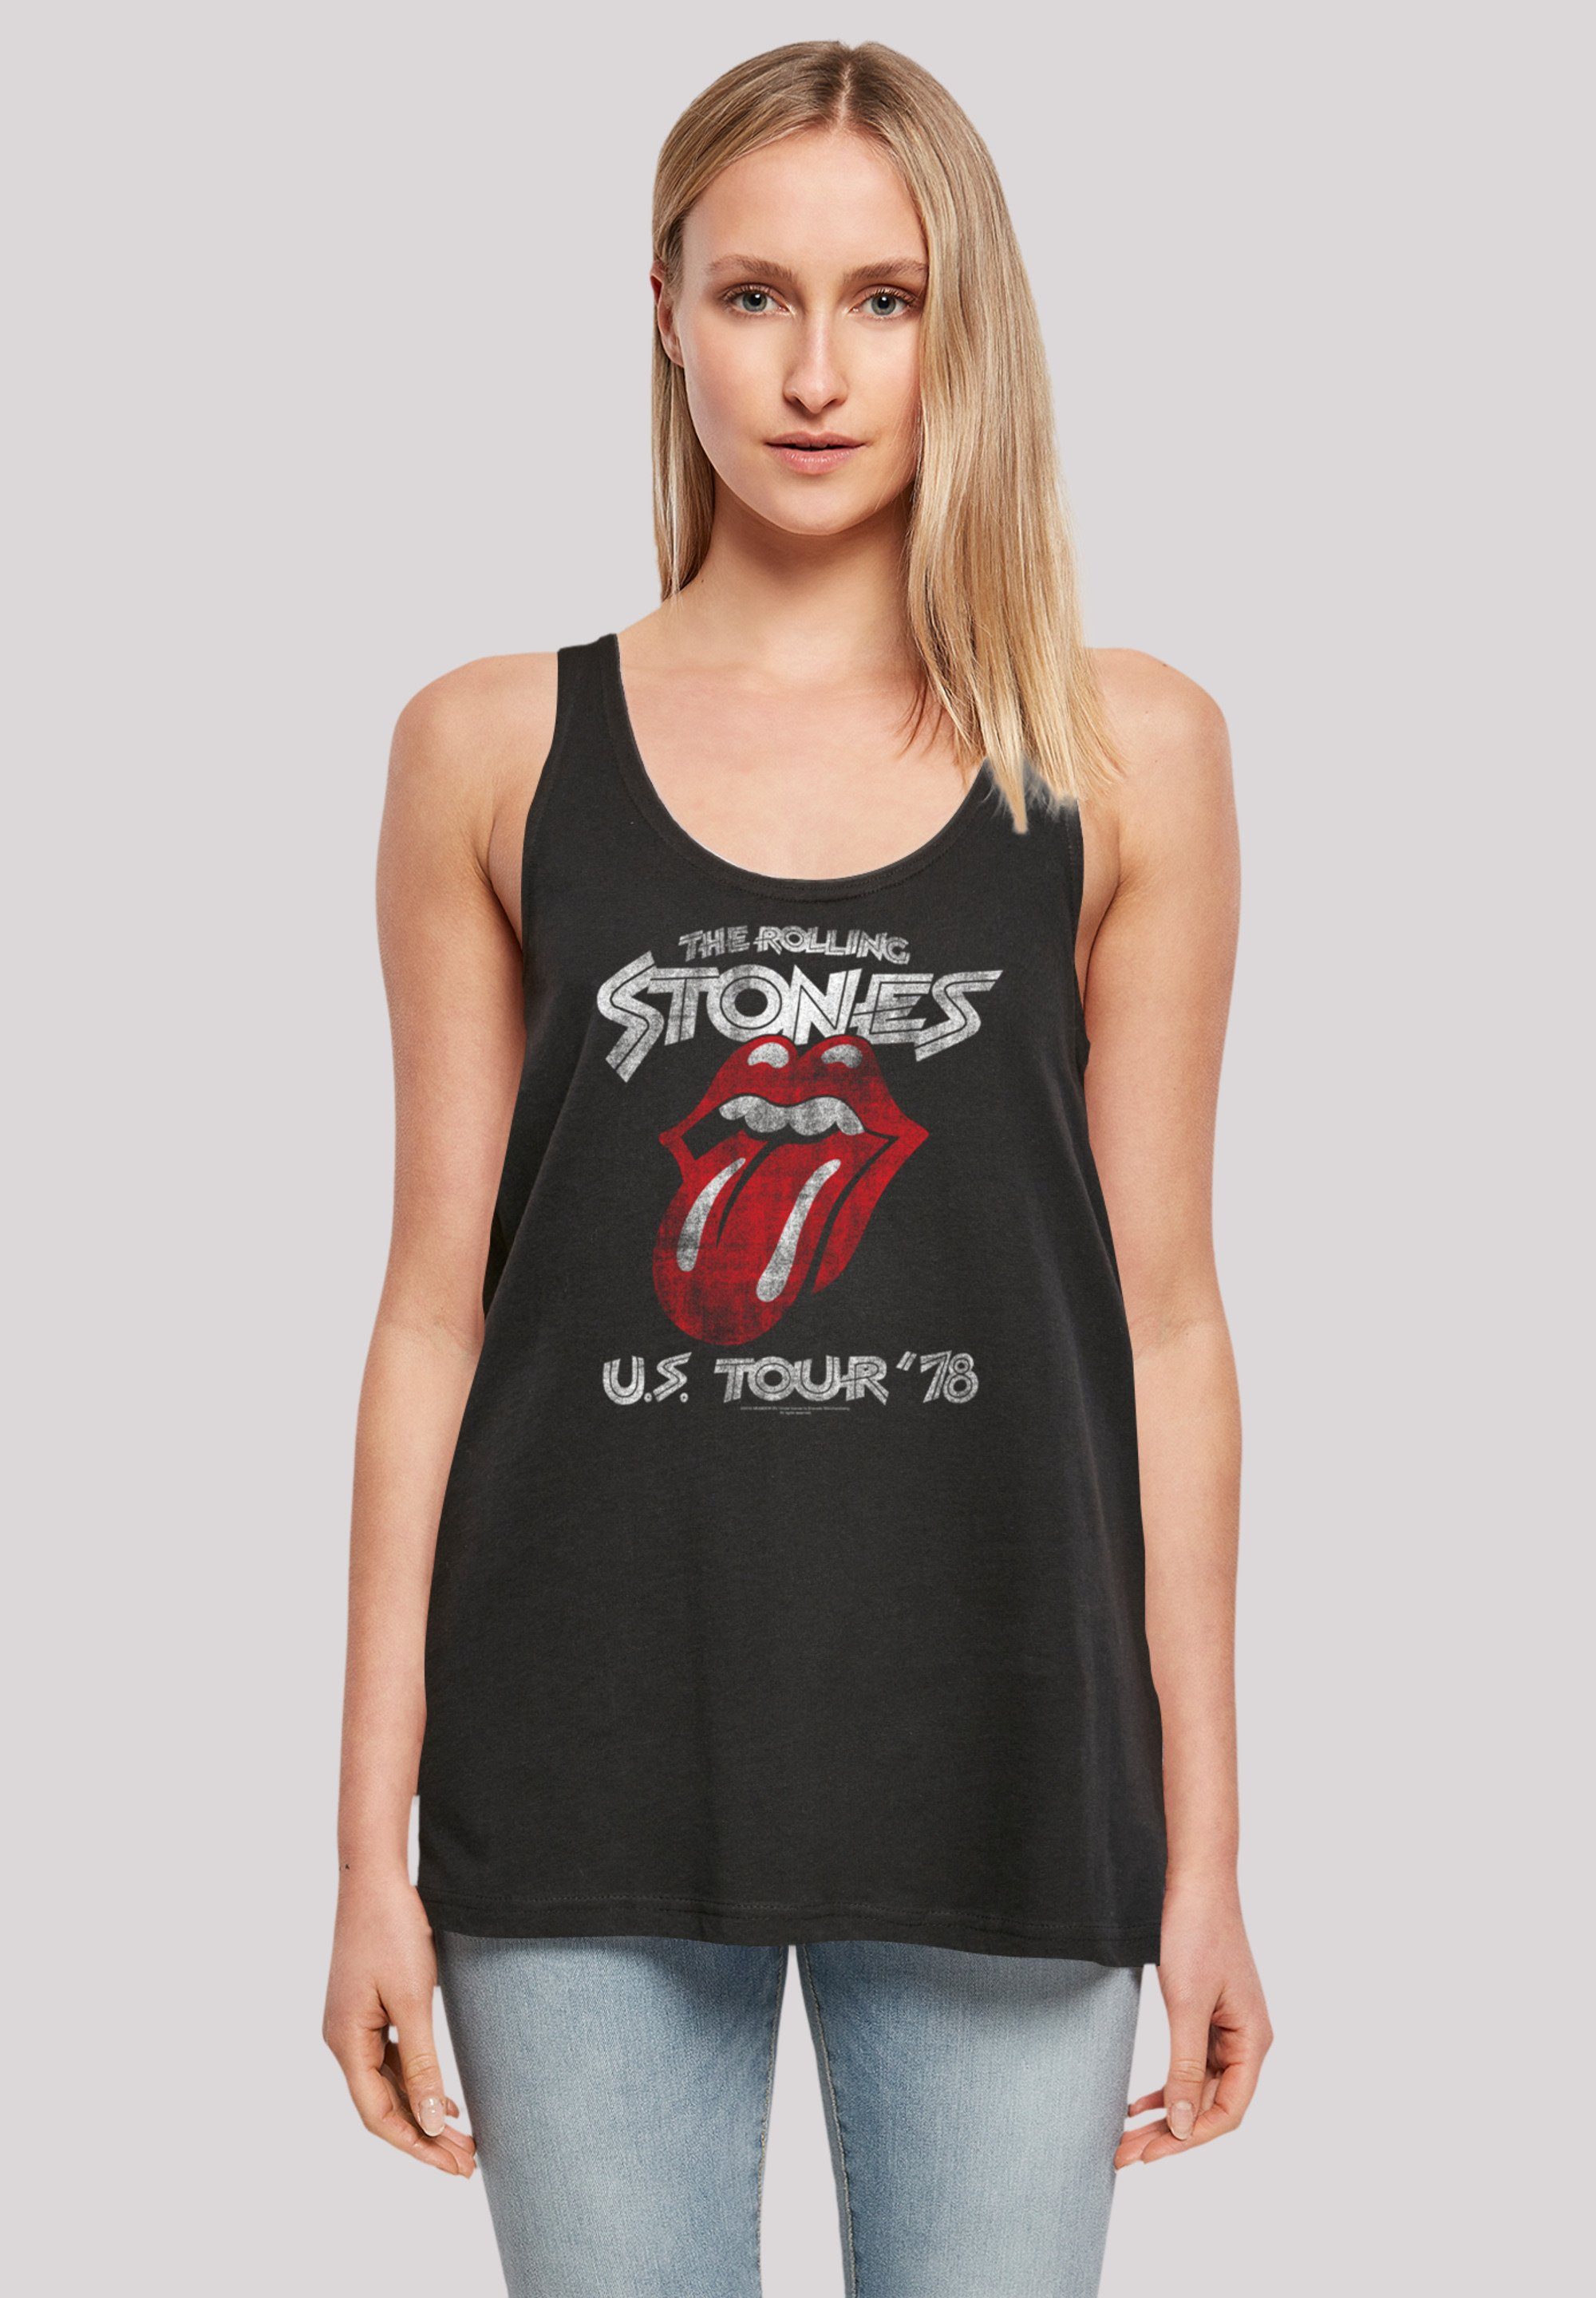 F4NT4STIC T-Shirt The Rolling Stones US Tour '78 Print, Offiziell  lizenziertes The Rolling Stones Tanktop